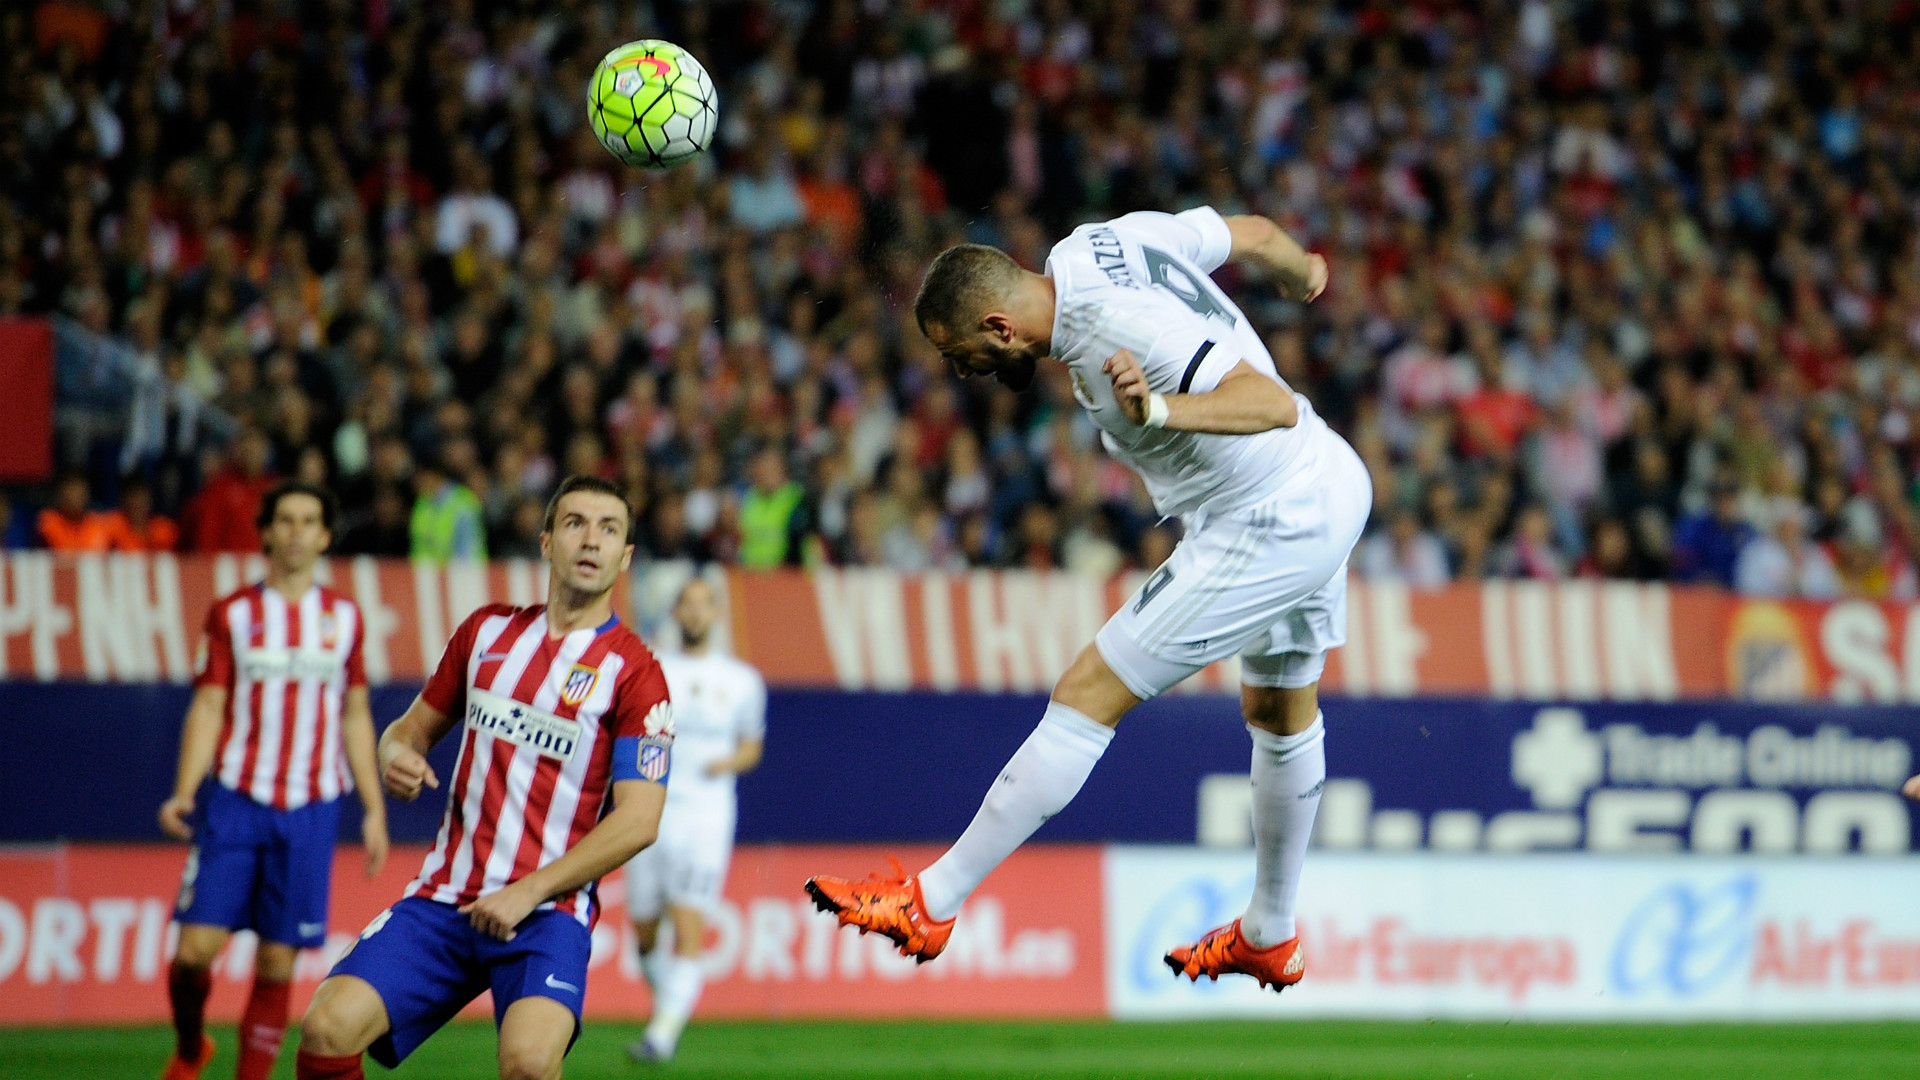 Who is favored in the Real Madrid vs. Atletico Madrid match?